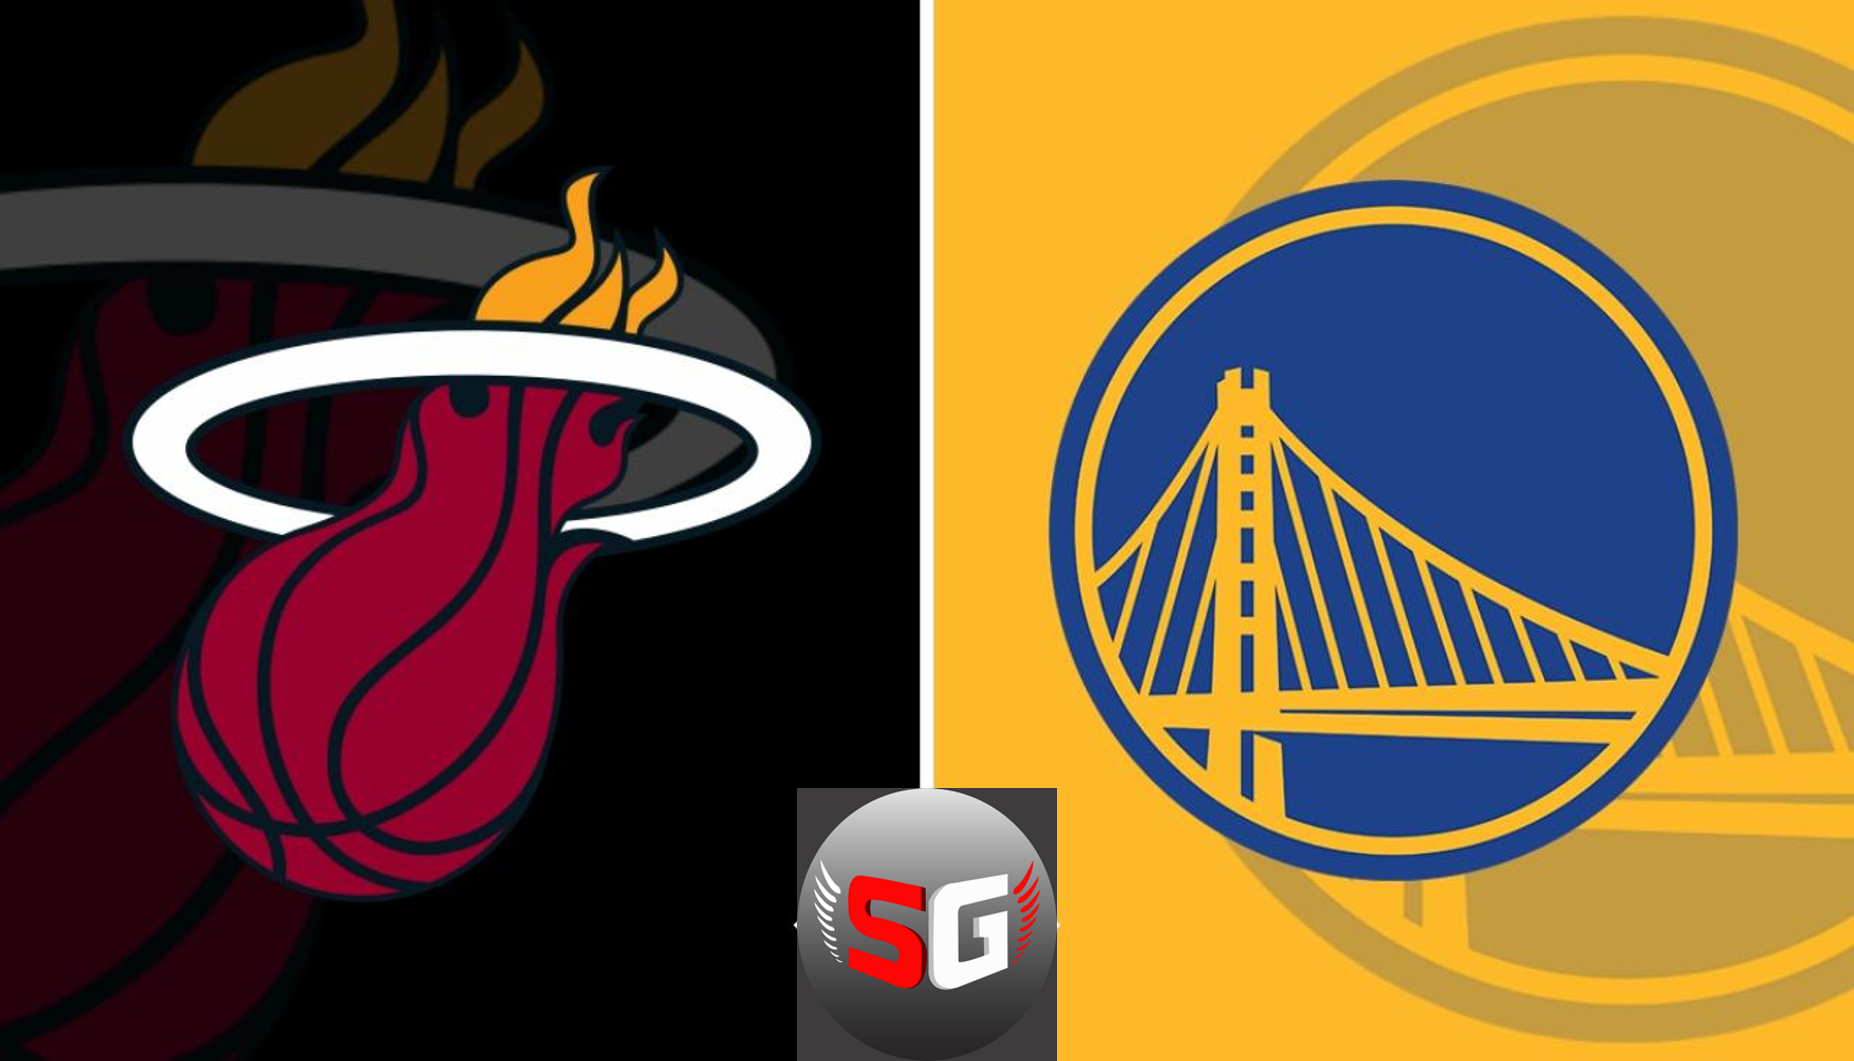 MIAMI HEAT VS GOLDEN STATE WARRIORS – NBA GAME DAY PREVIEW: 02.17.2021